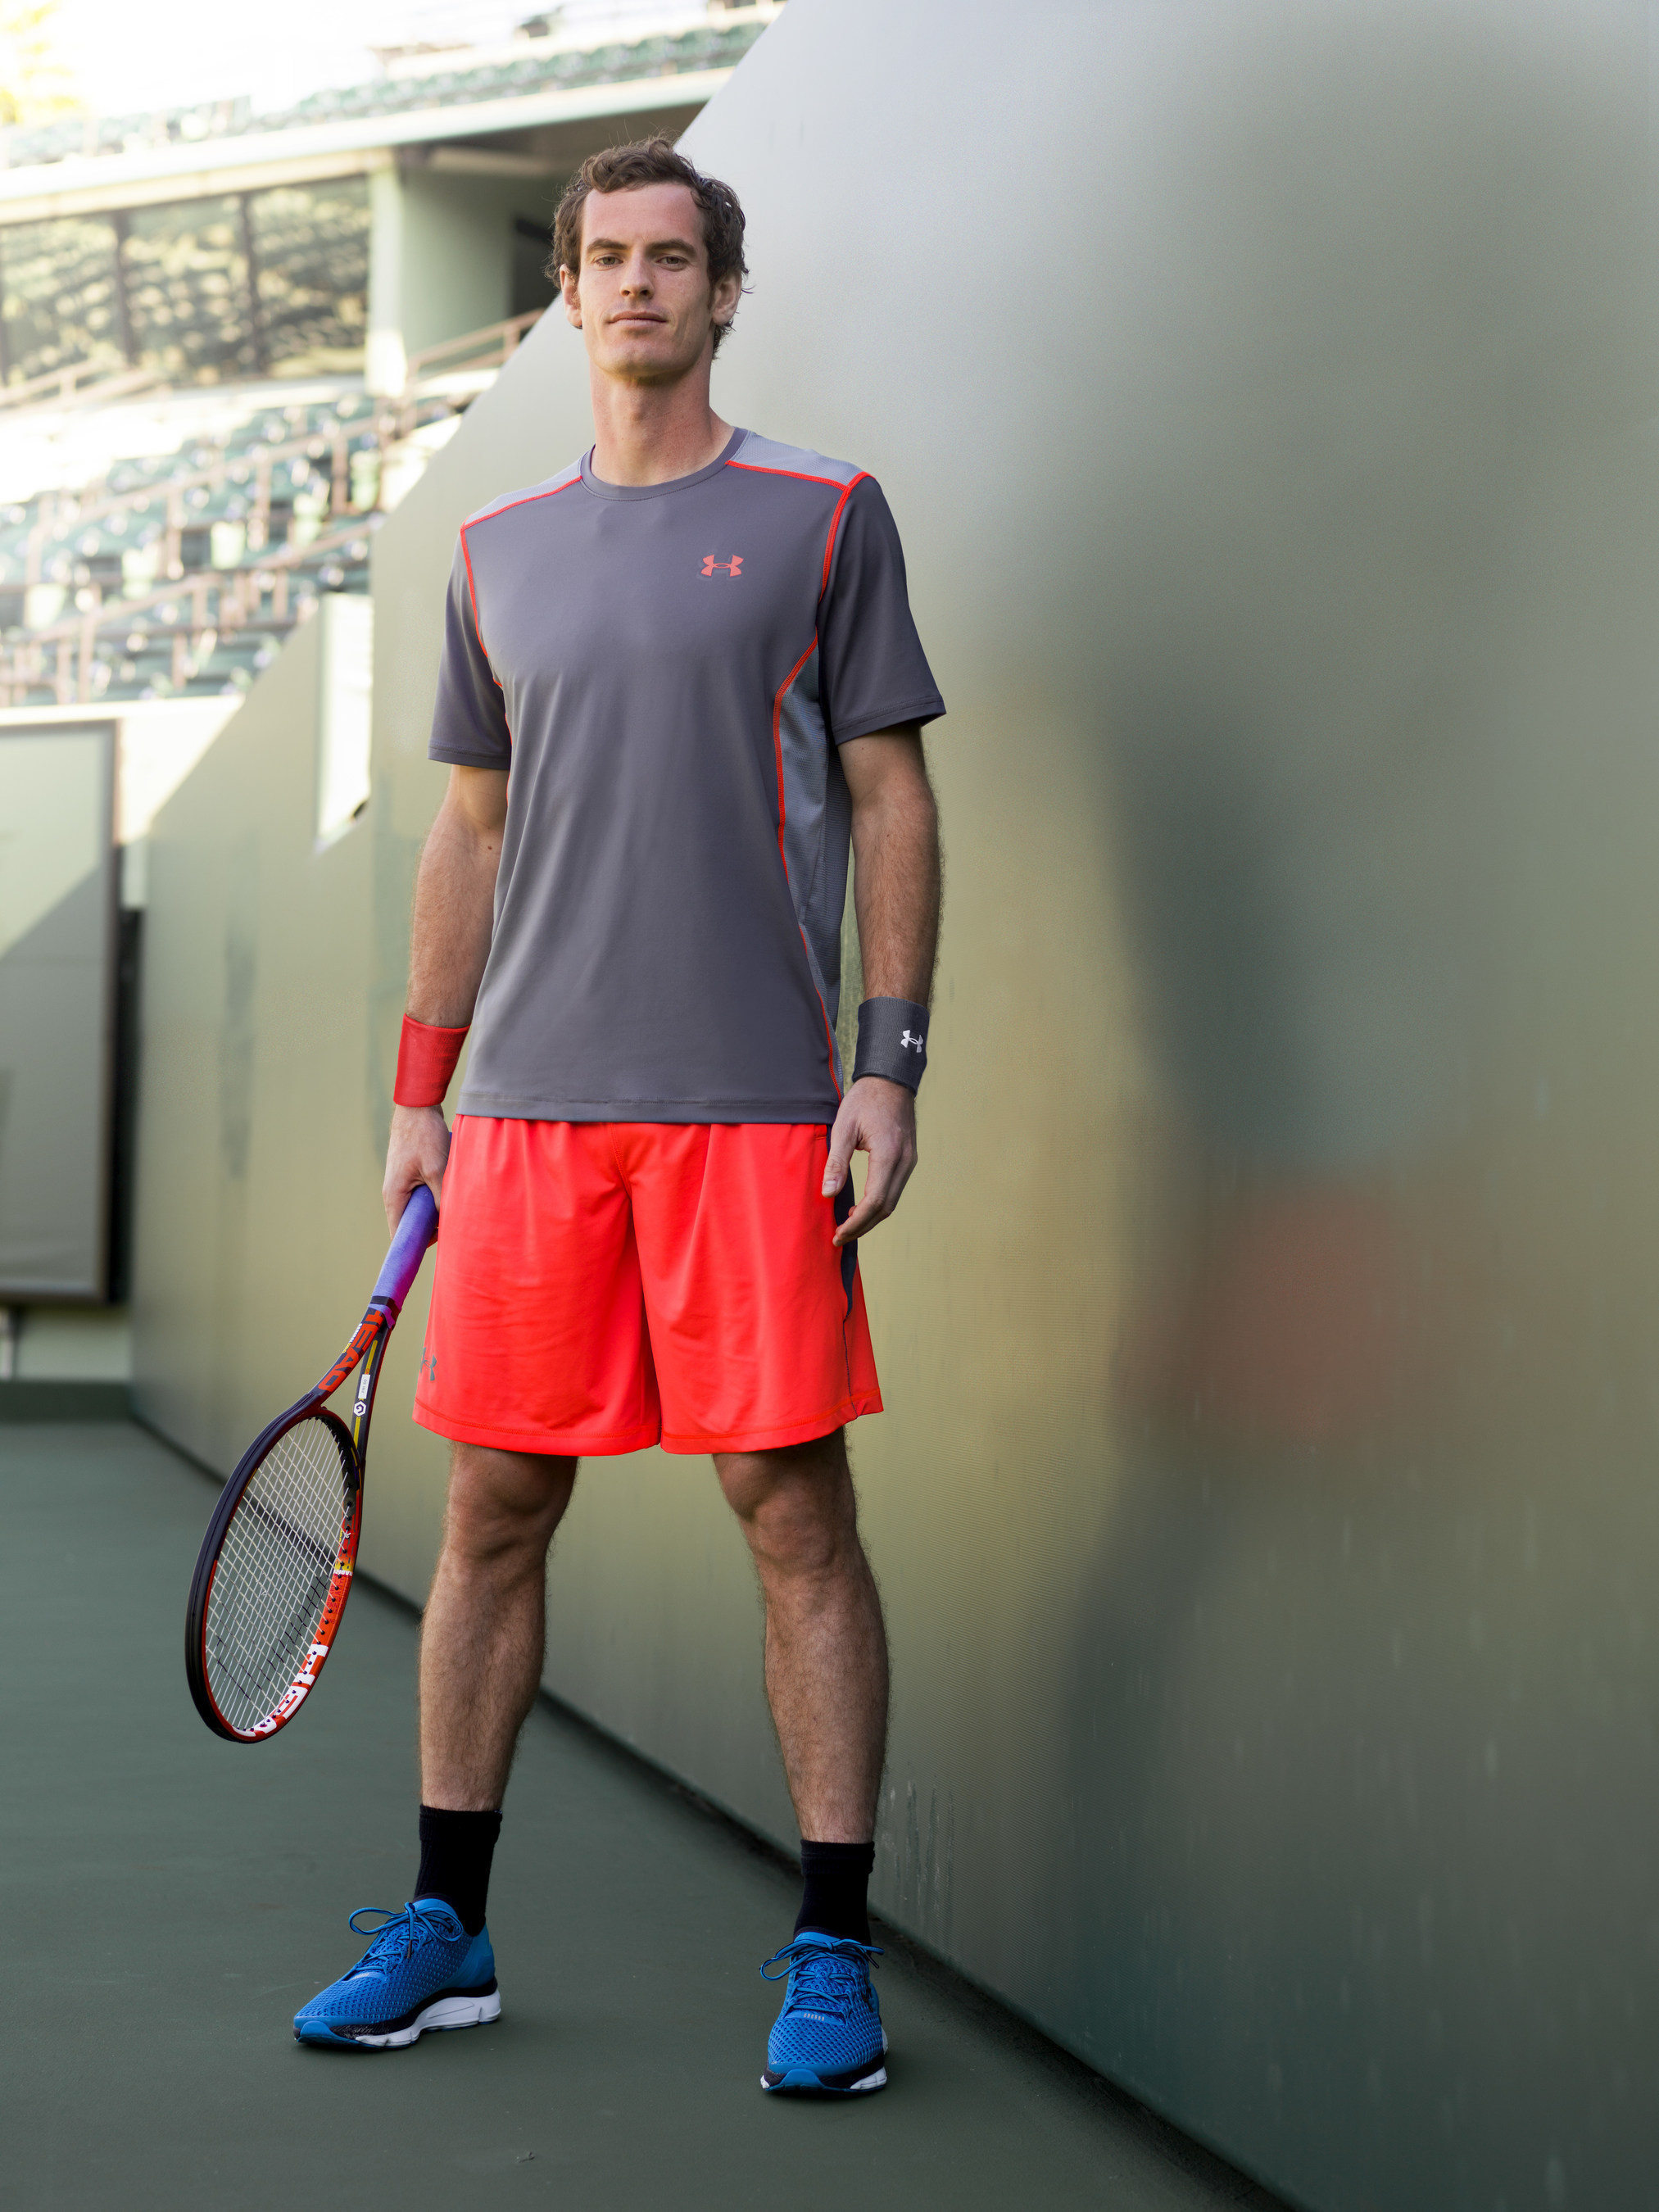 Under Armour Signs World Champion Tennis Player Andy